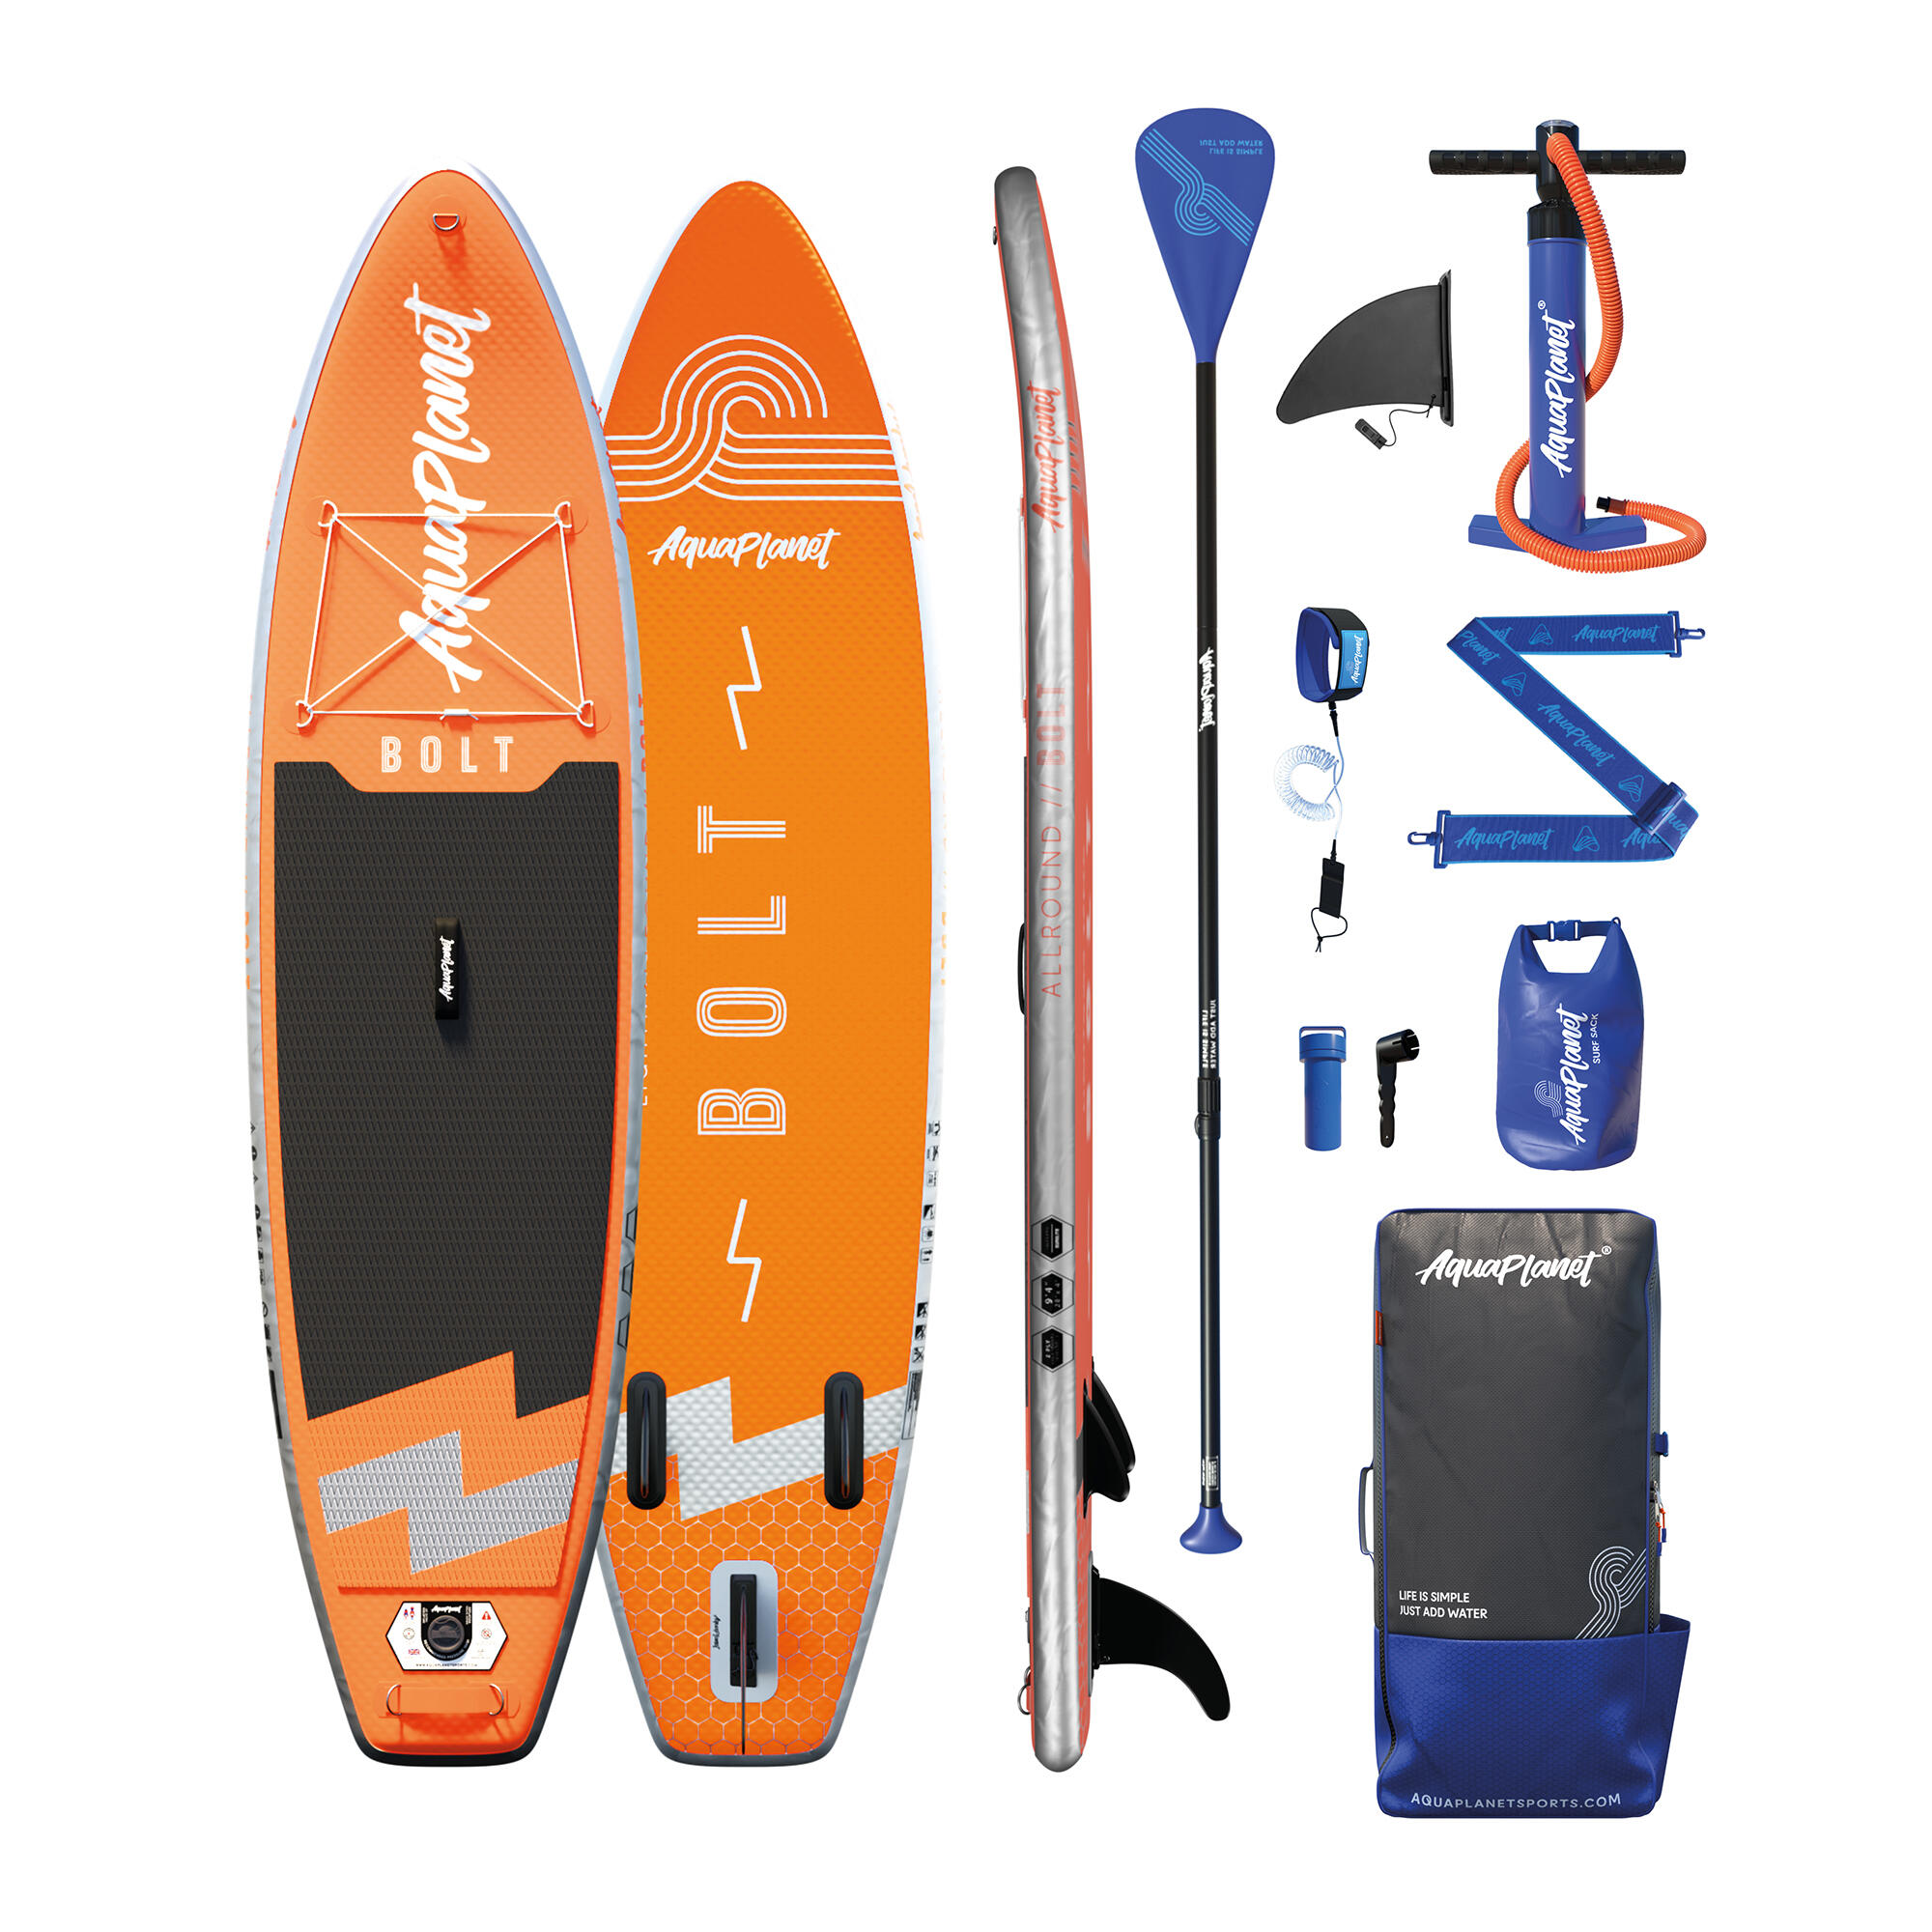 AQUAPLANET Aquaplanet BOLT 9'4 Junior Inflatable Paddle Board Package - Coral